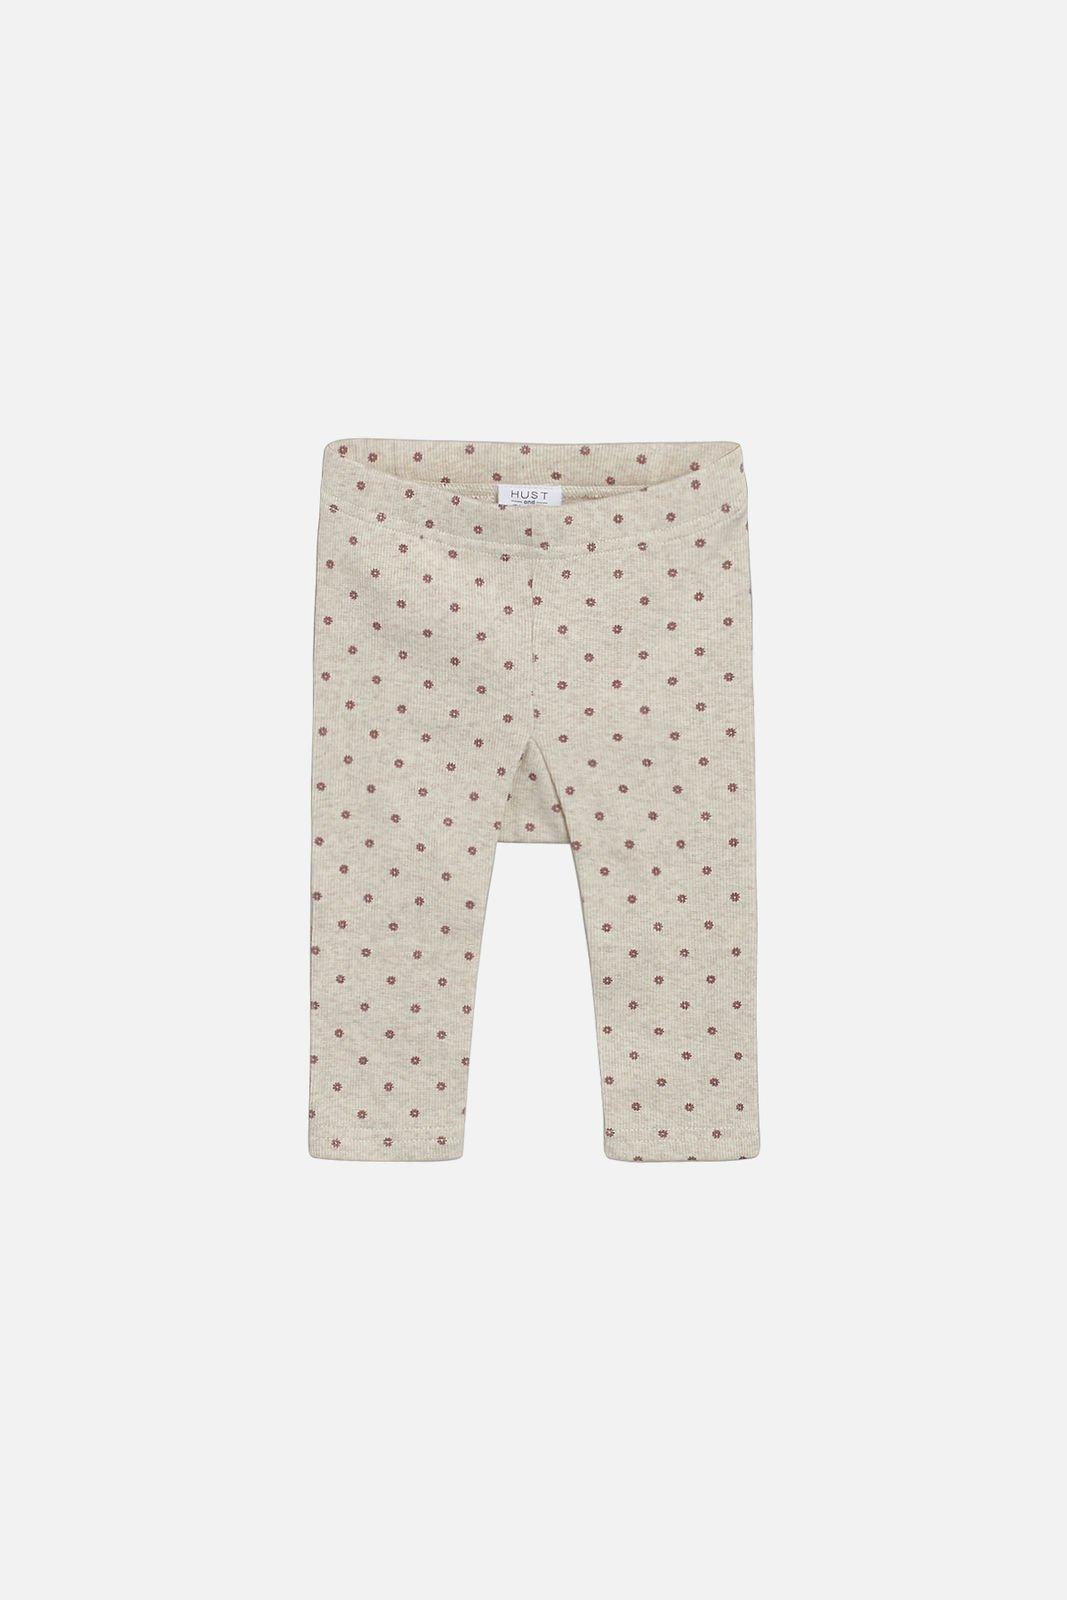 Image of Hust and Claire Baby Leggings Lara - 80